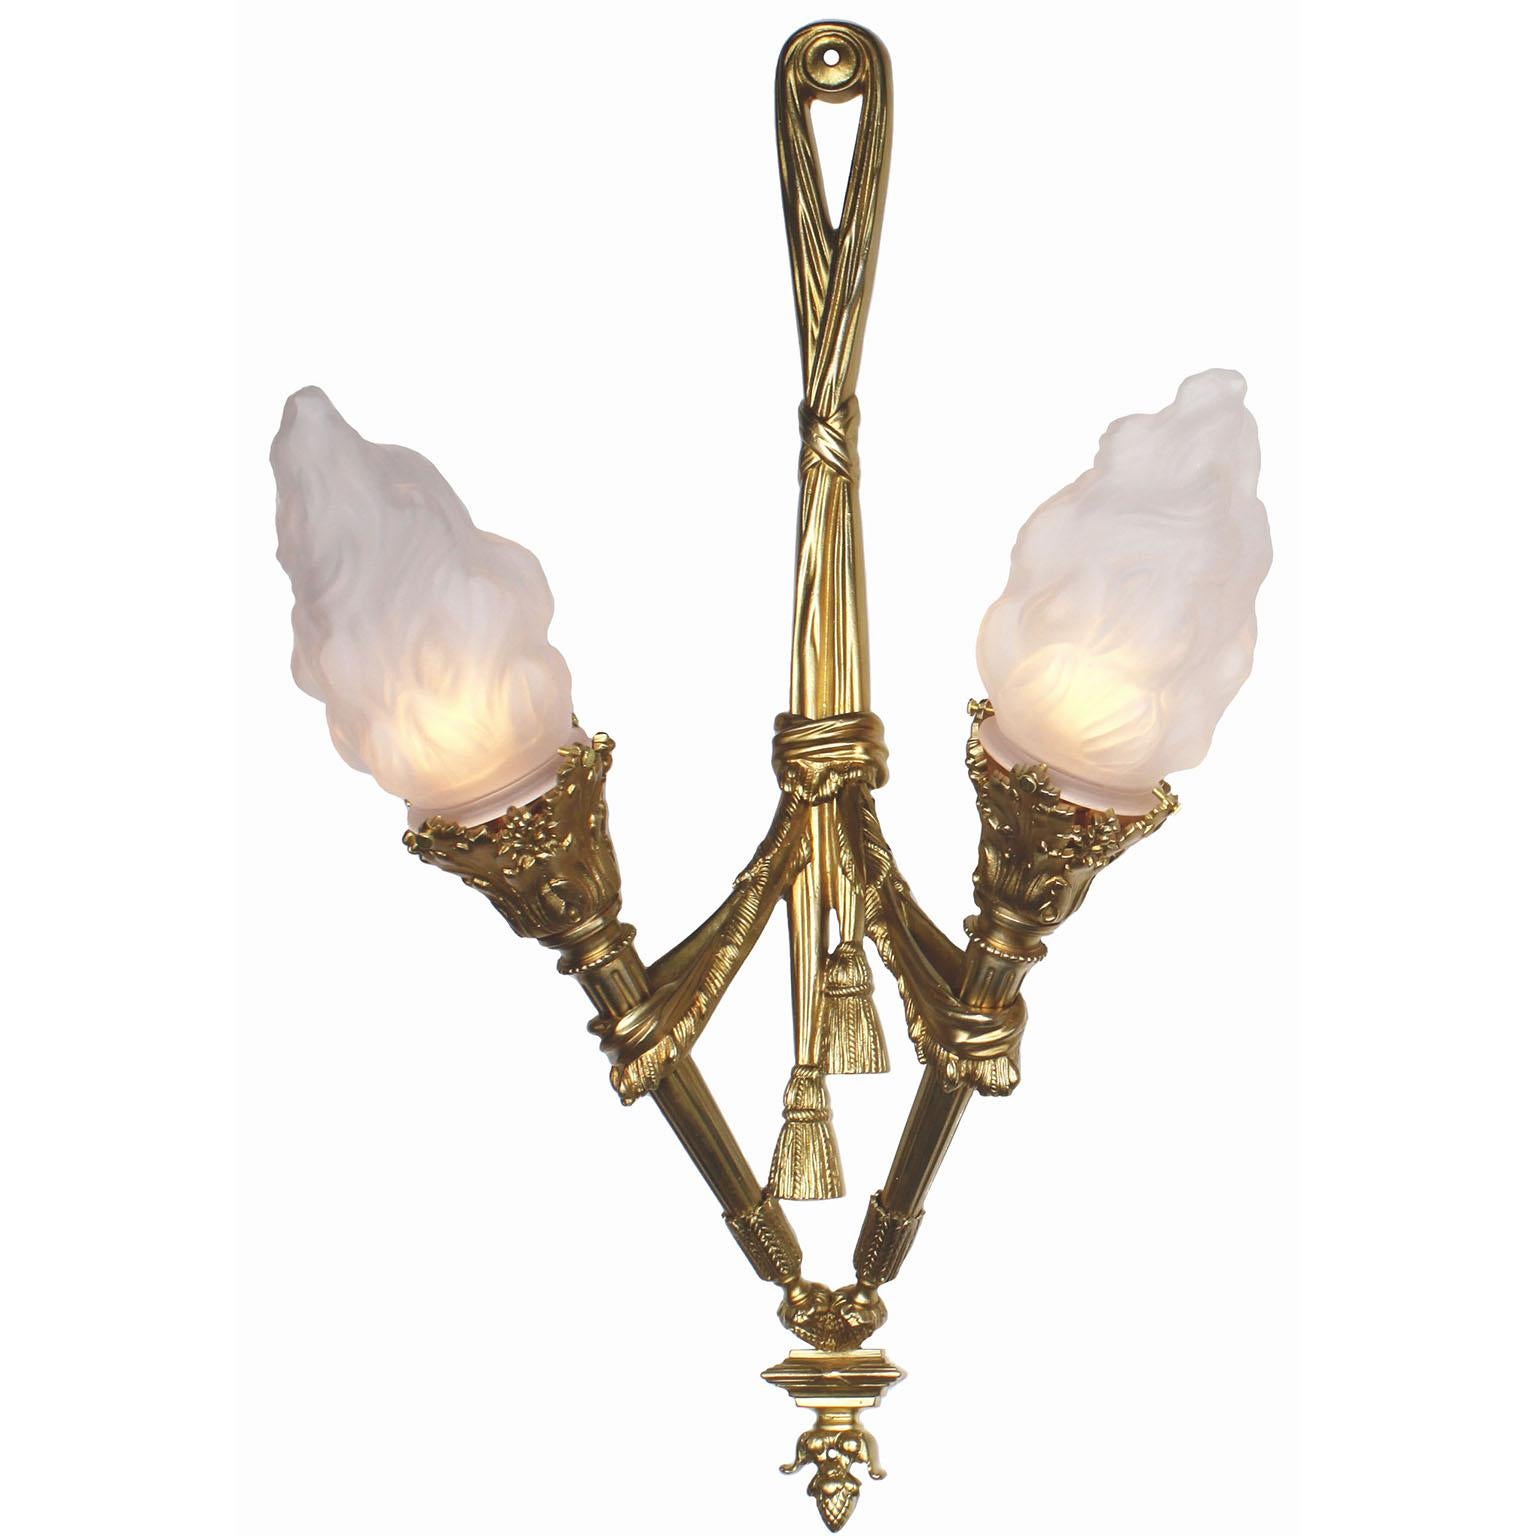 A pair of French empire style gilt-bronze two-light wall torchère sconces. Each elongated gilt-bronze applique with central twin-tassels supporting a pair of torches, each fitted with frosted glass flame shades and ending with acorn finials.